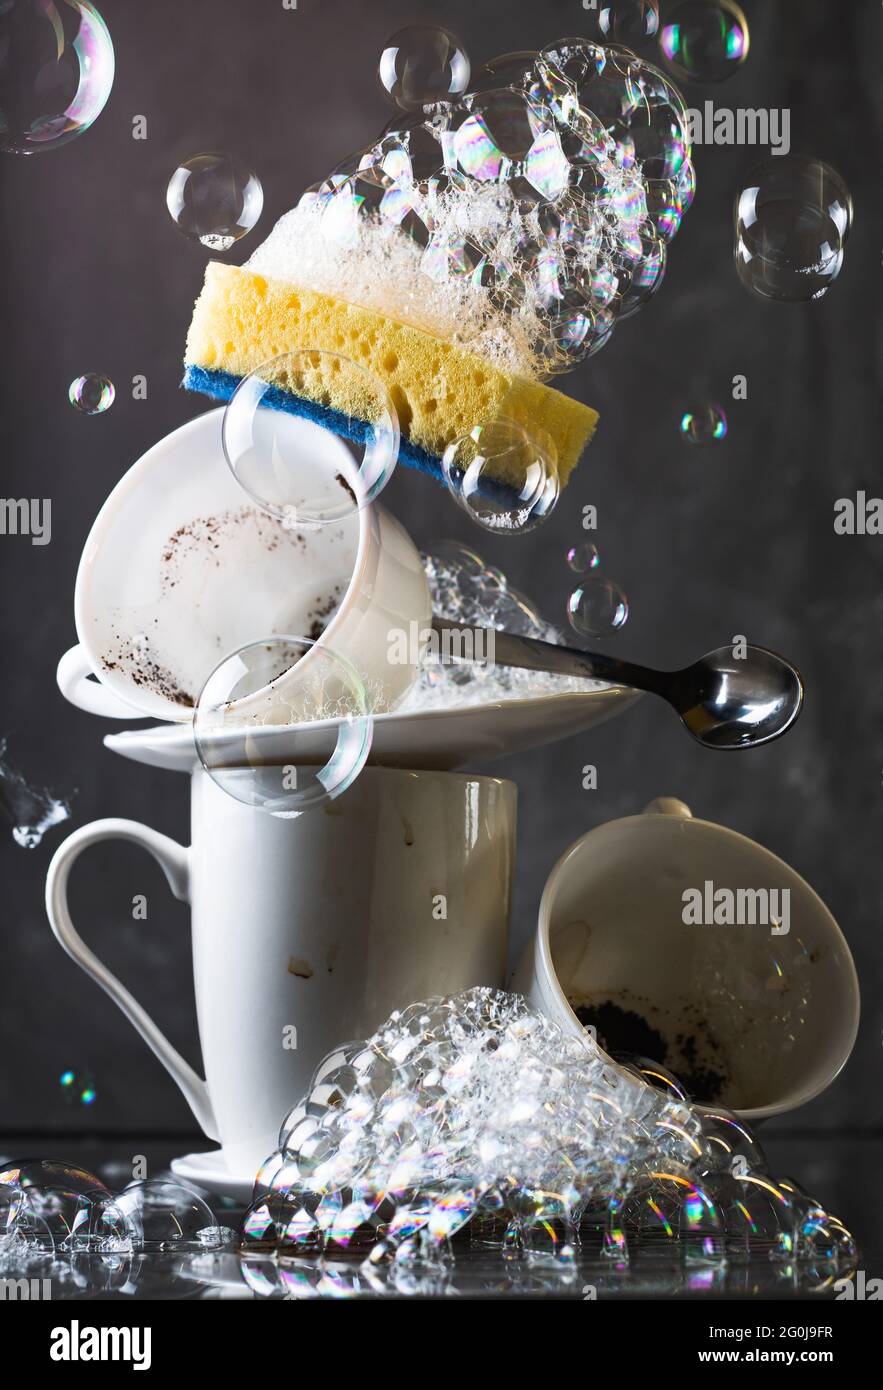 https://c8.alamy.com/comp/2G0J9FR/stack-of-dirty-white-dishes-on-dark-background-with-washing-sponge-and-bubbles-2G0J9FR.jpg